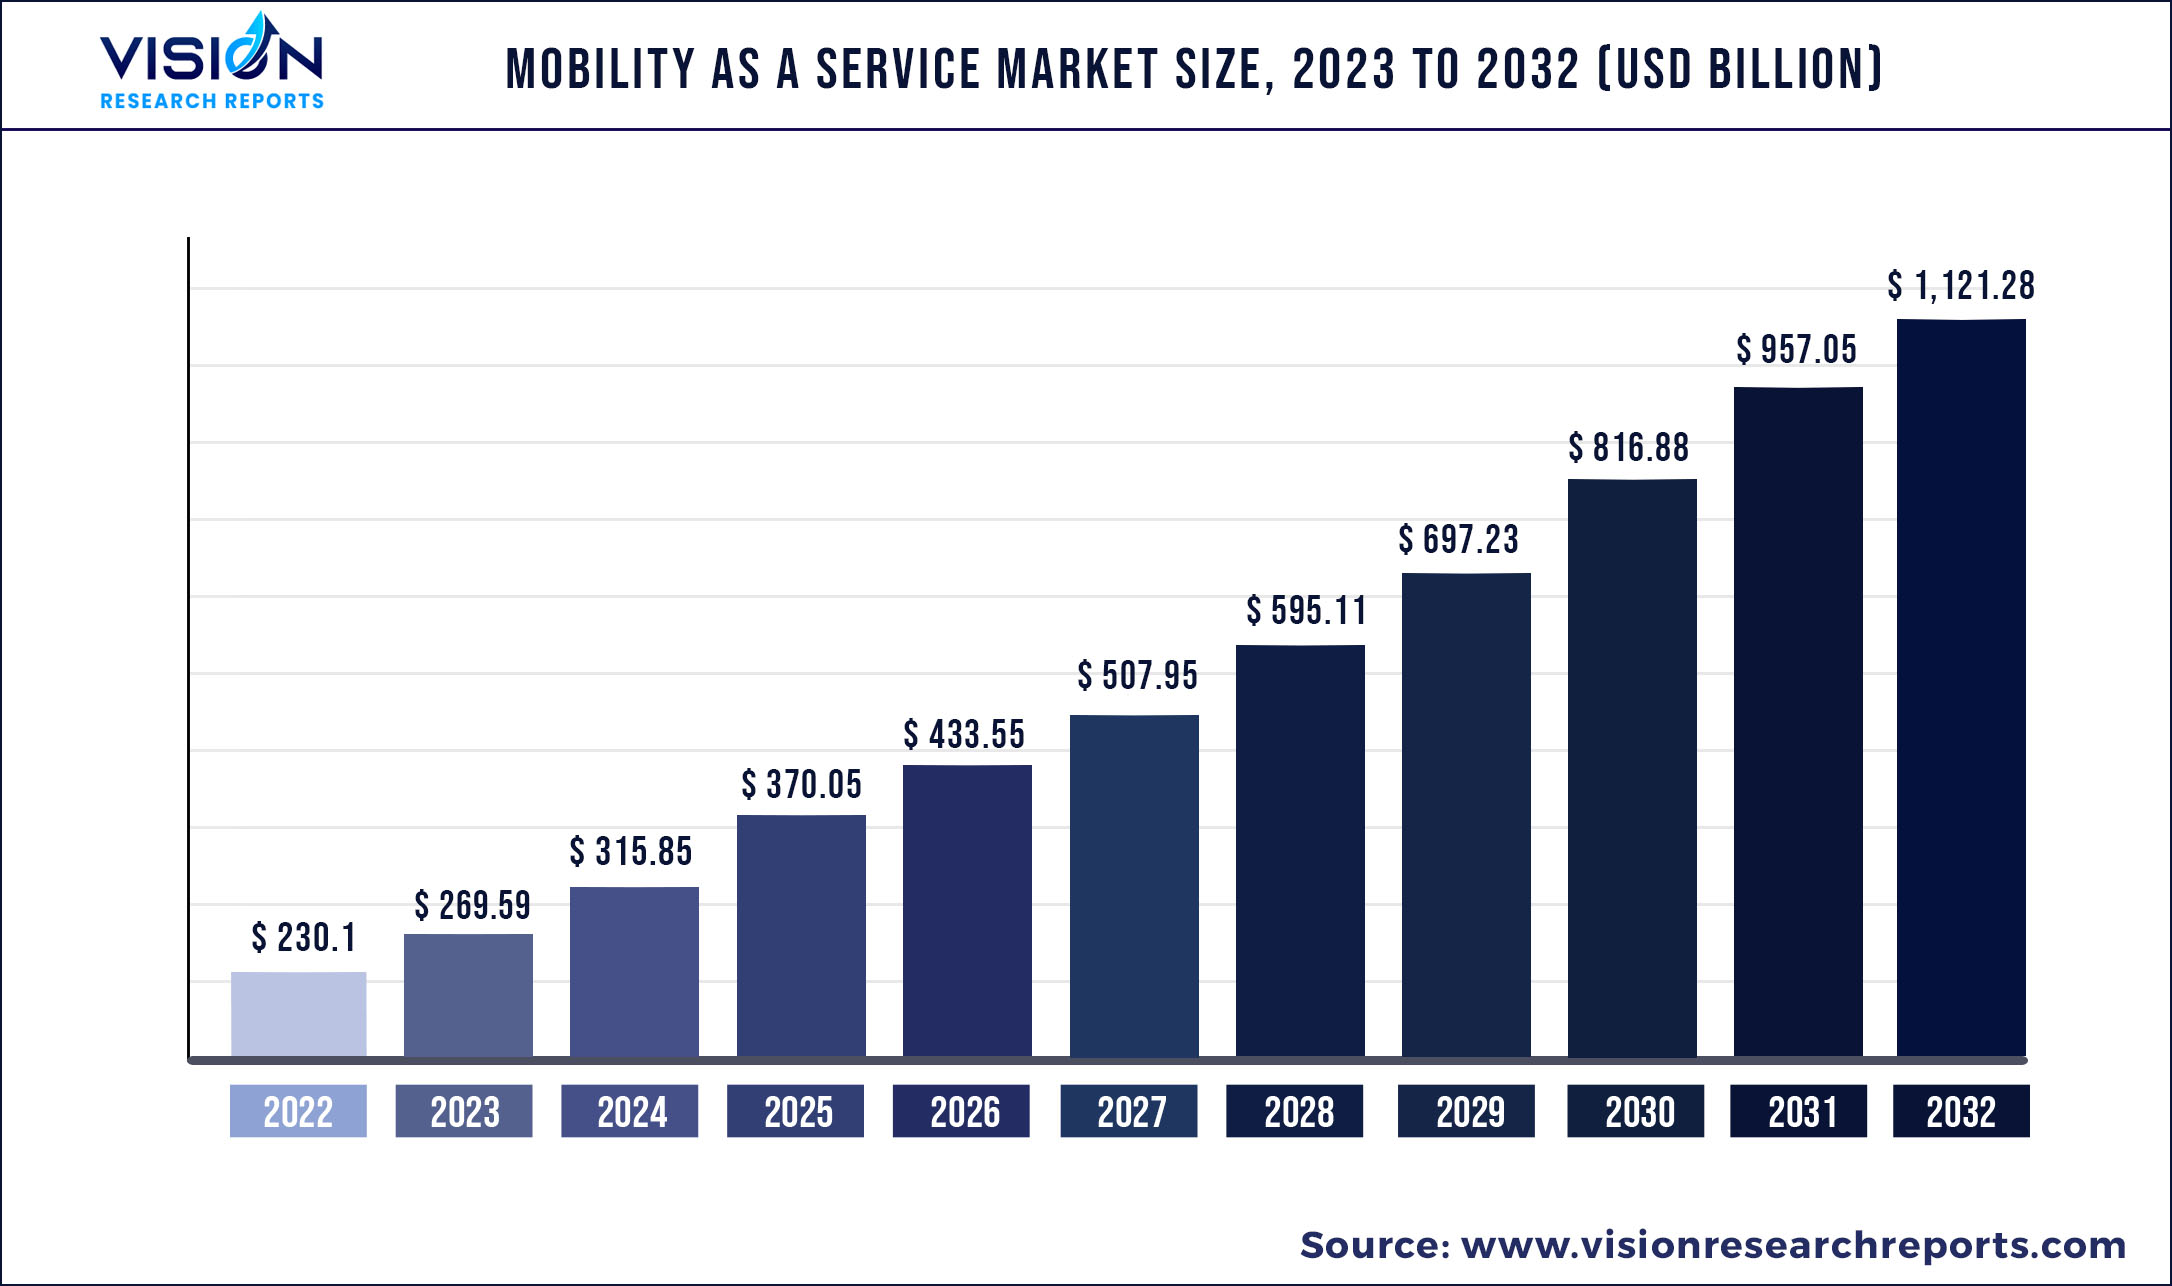 Mobility as a Service Market Size 2023 to 2032